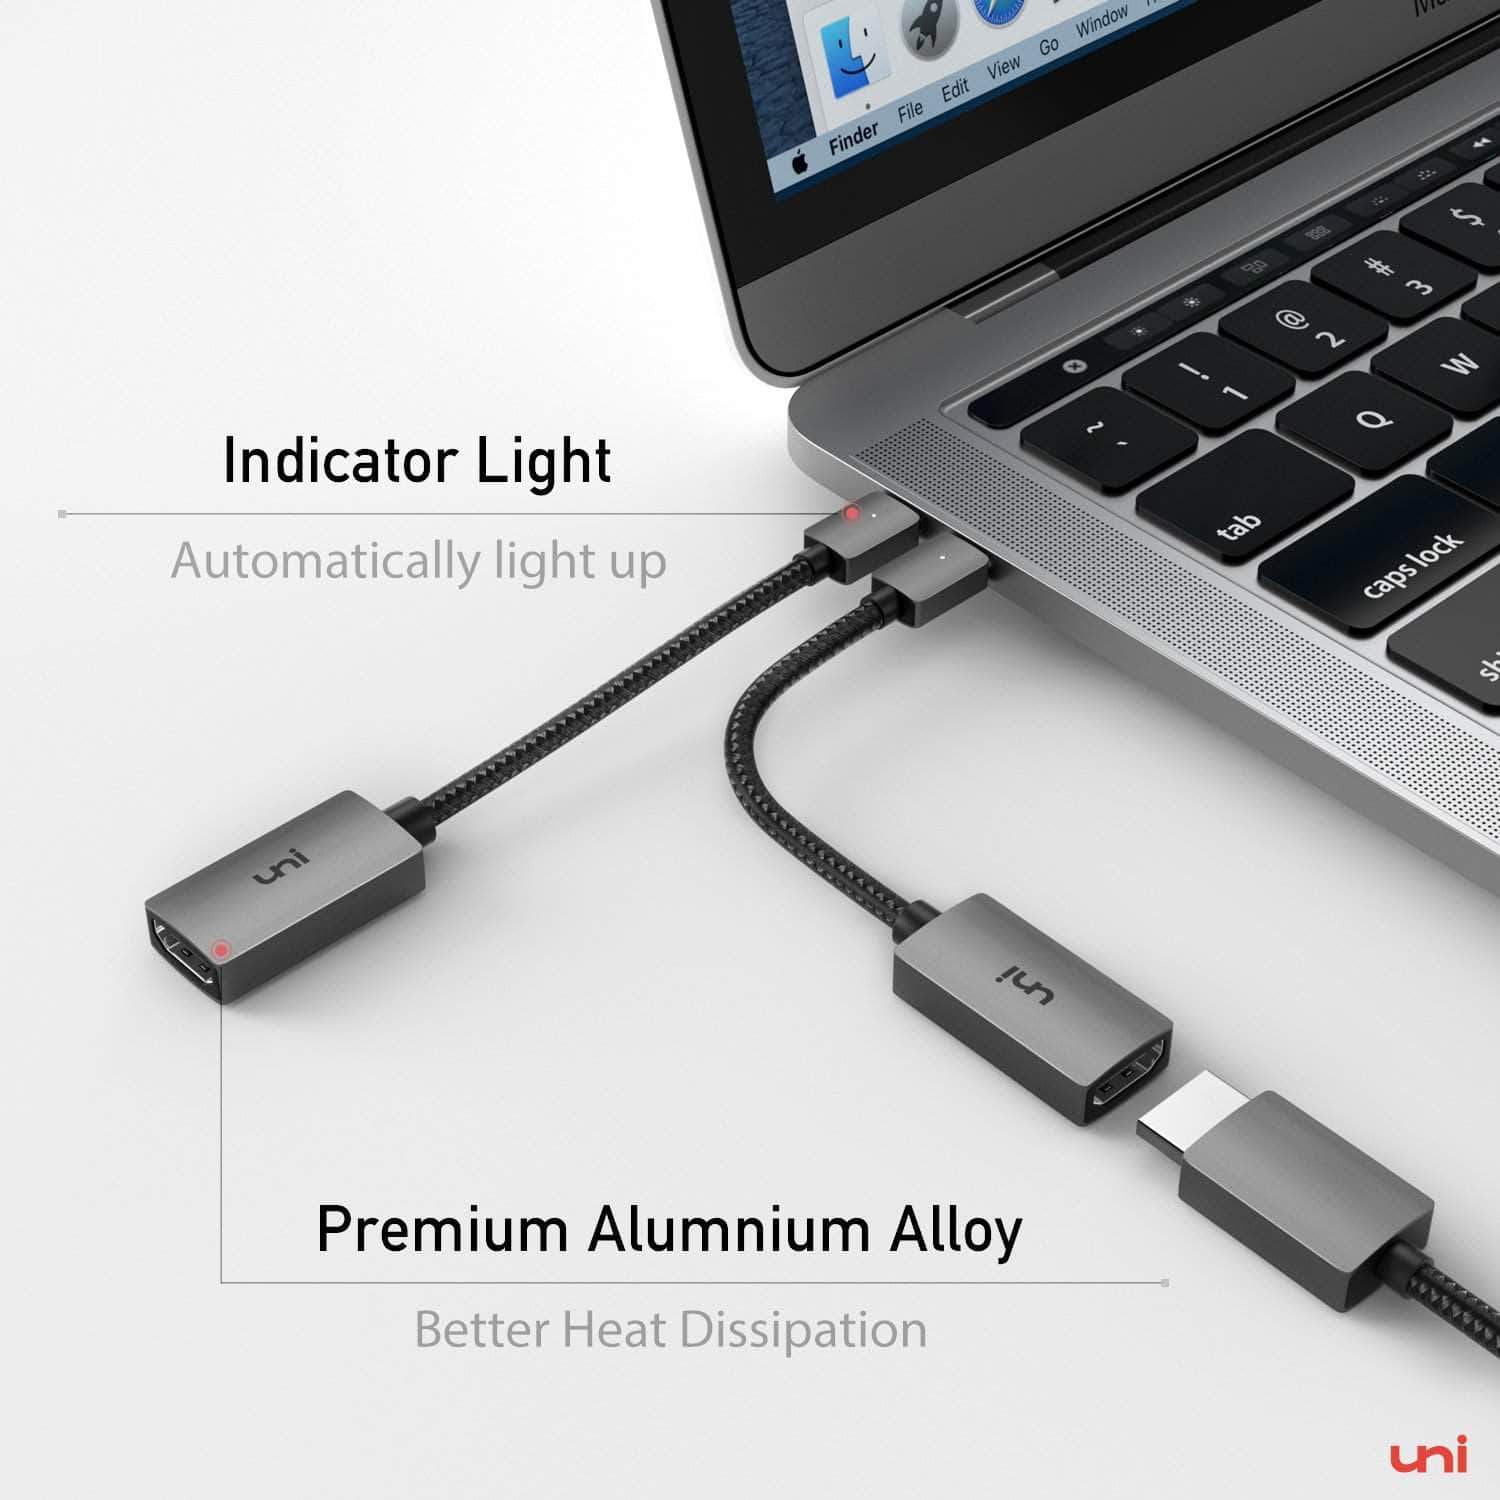 C to HDMI Adapter 4K, Dual Monitor Setup for MacBook Pro | uni®